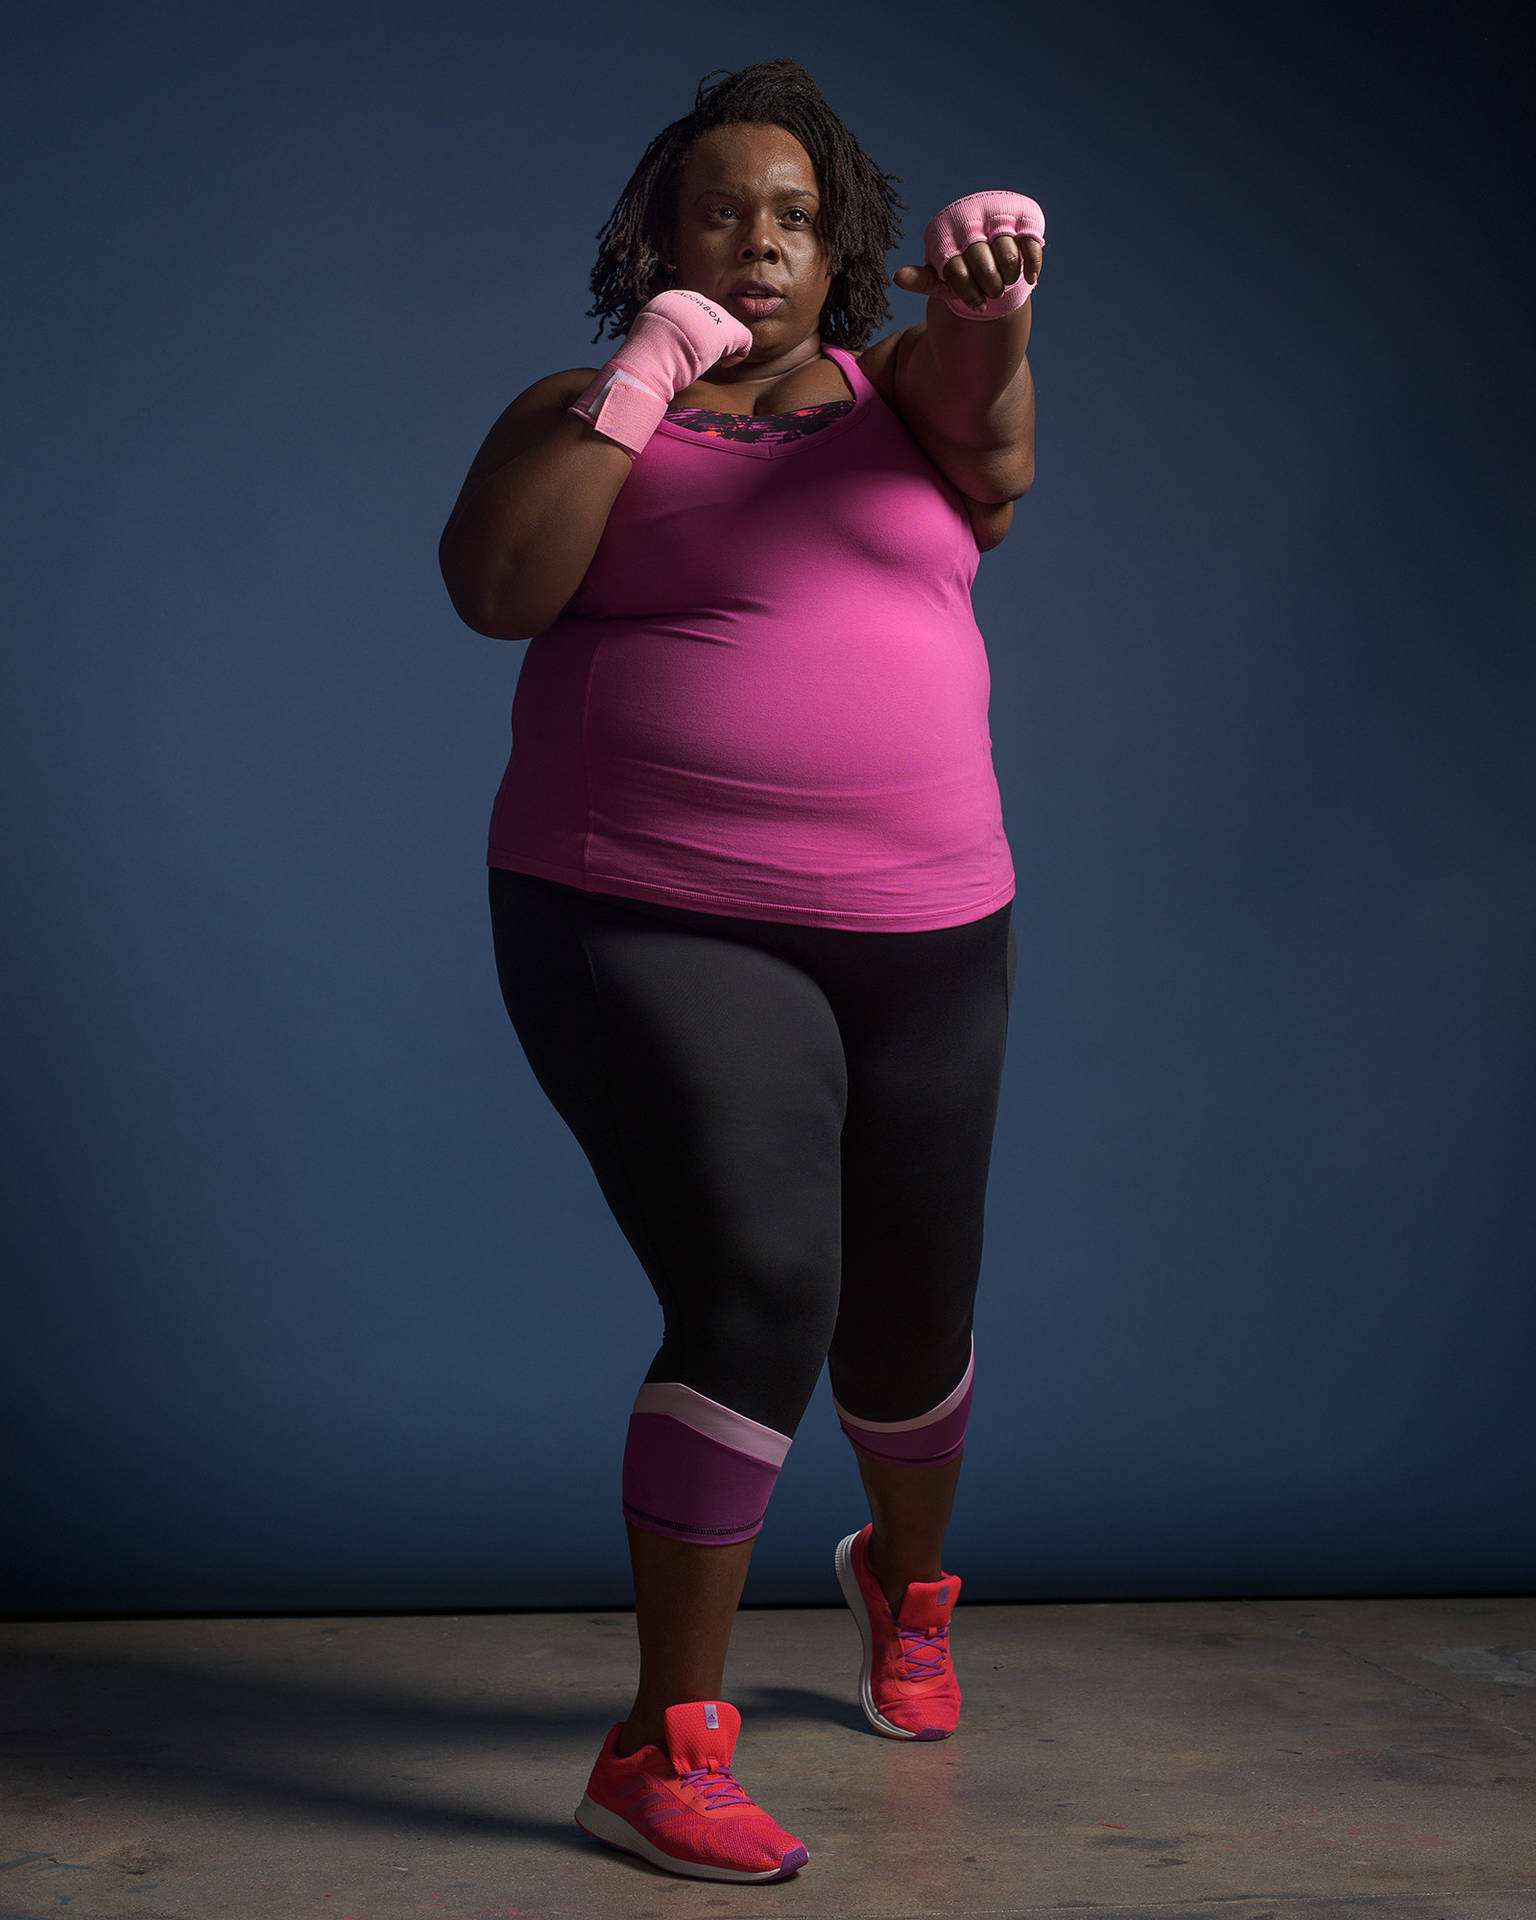 Download Fat Girl In A Gym Outfit Wallpaper | Wallpapers.Com